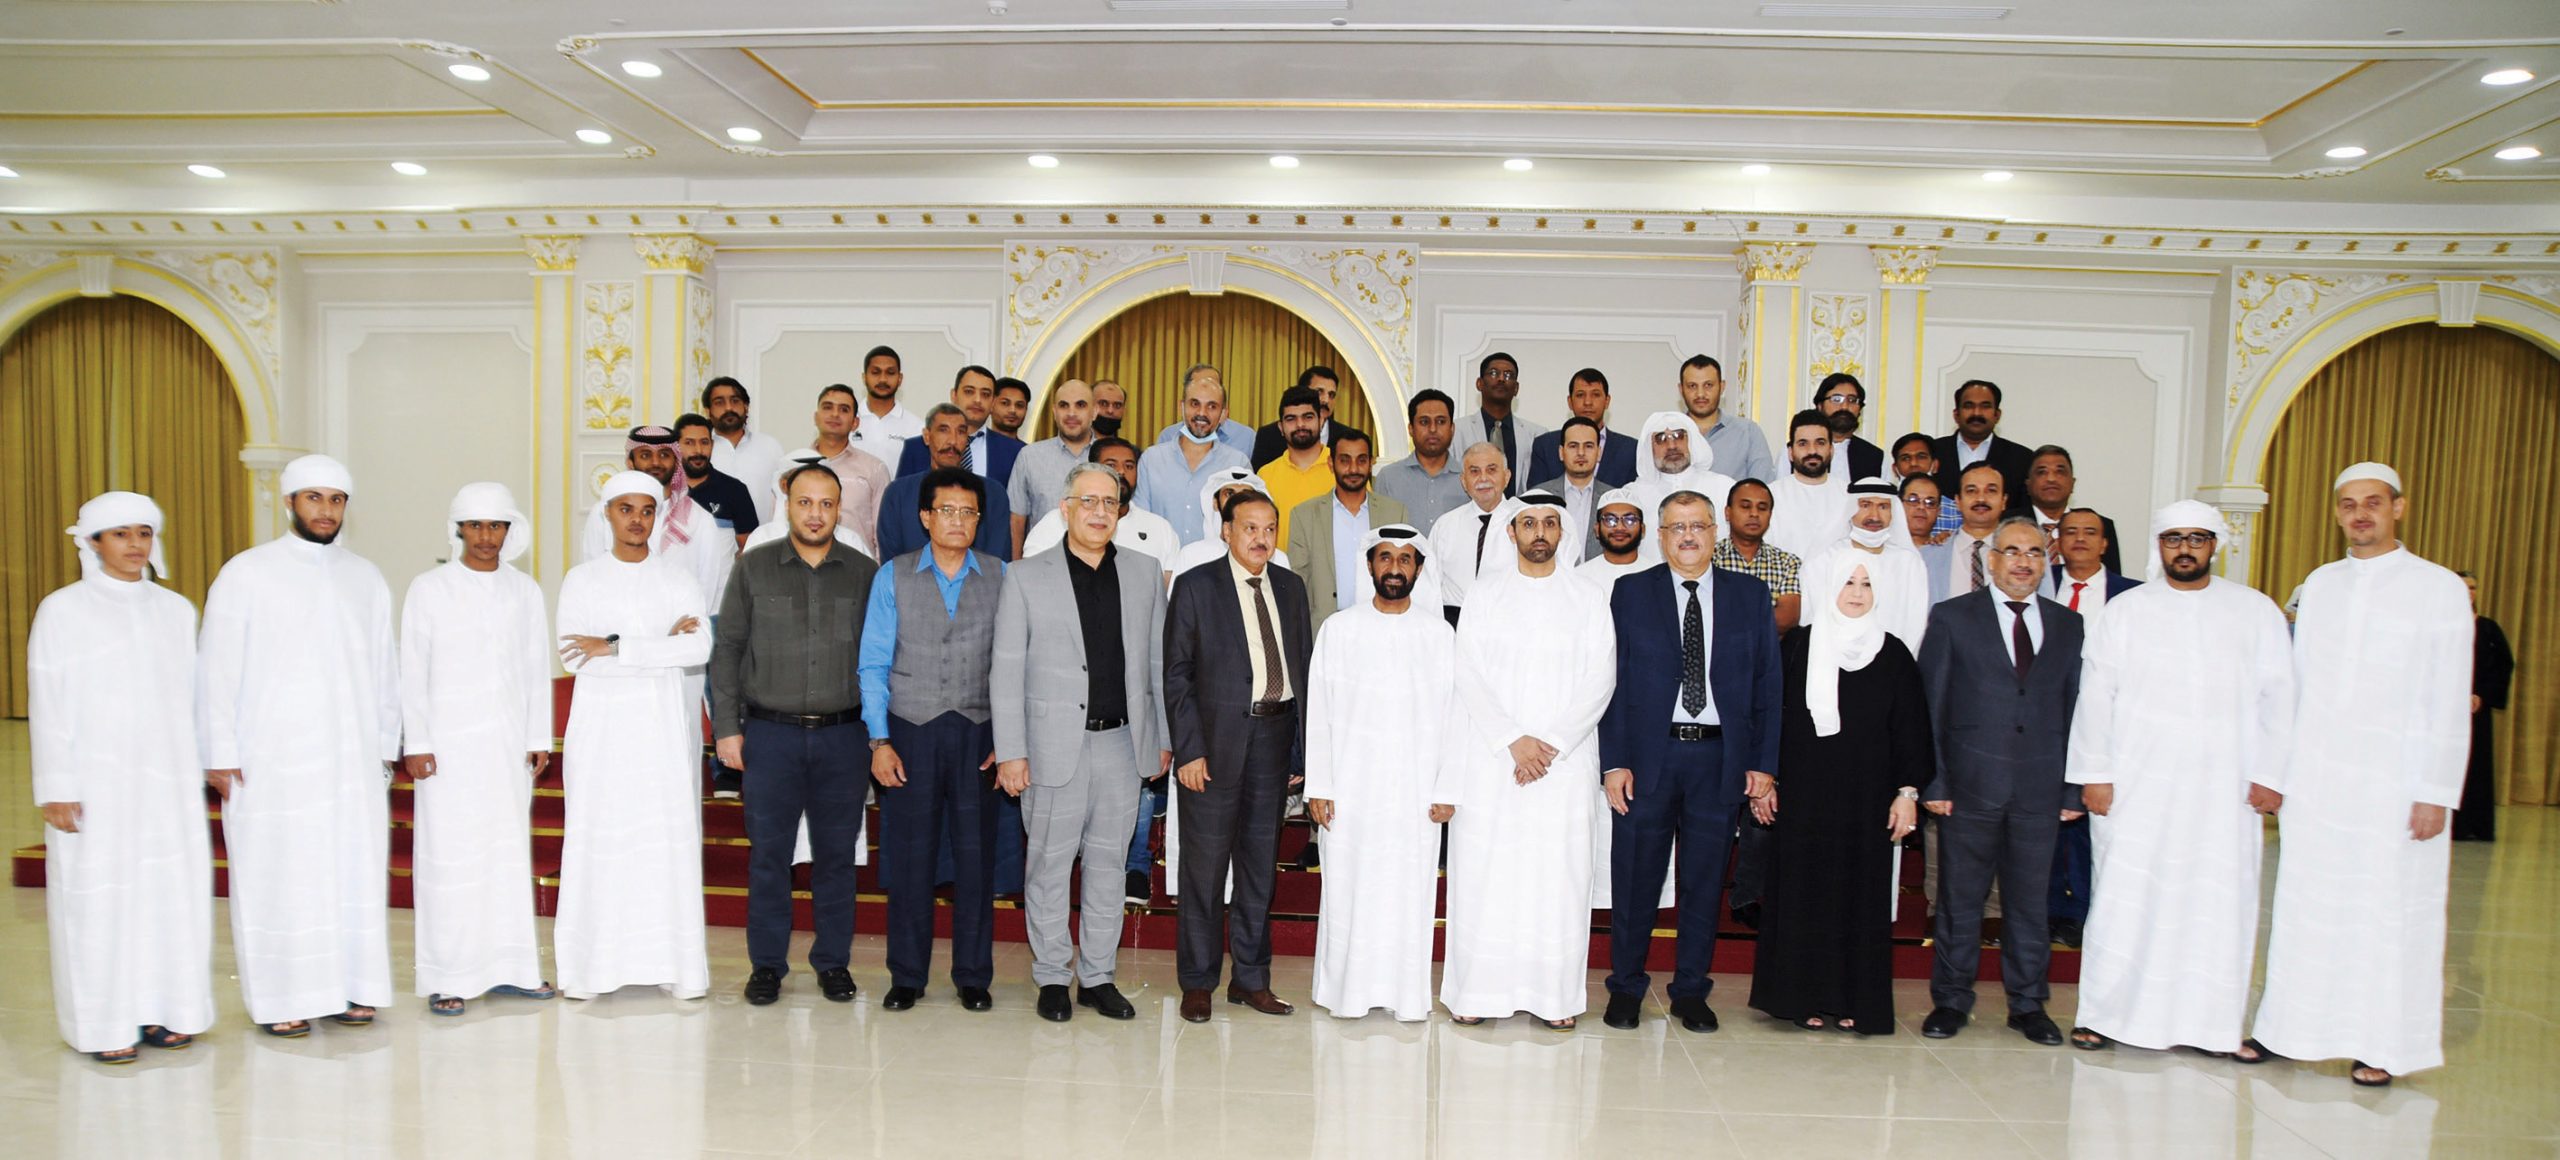 Bin Ham Group hosts Iftar for employees